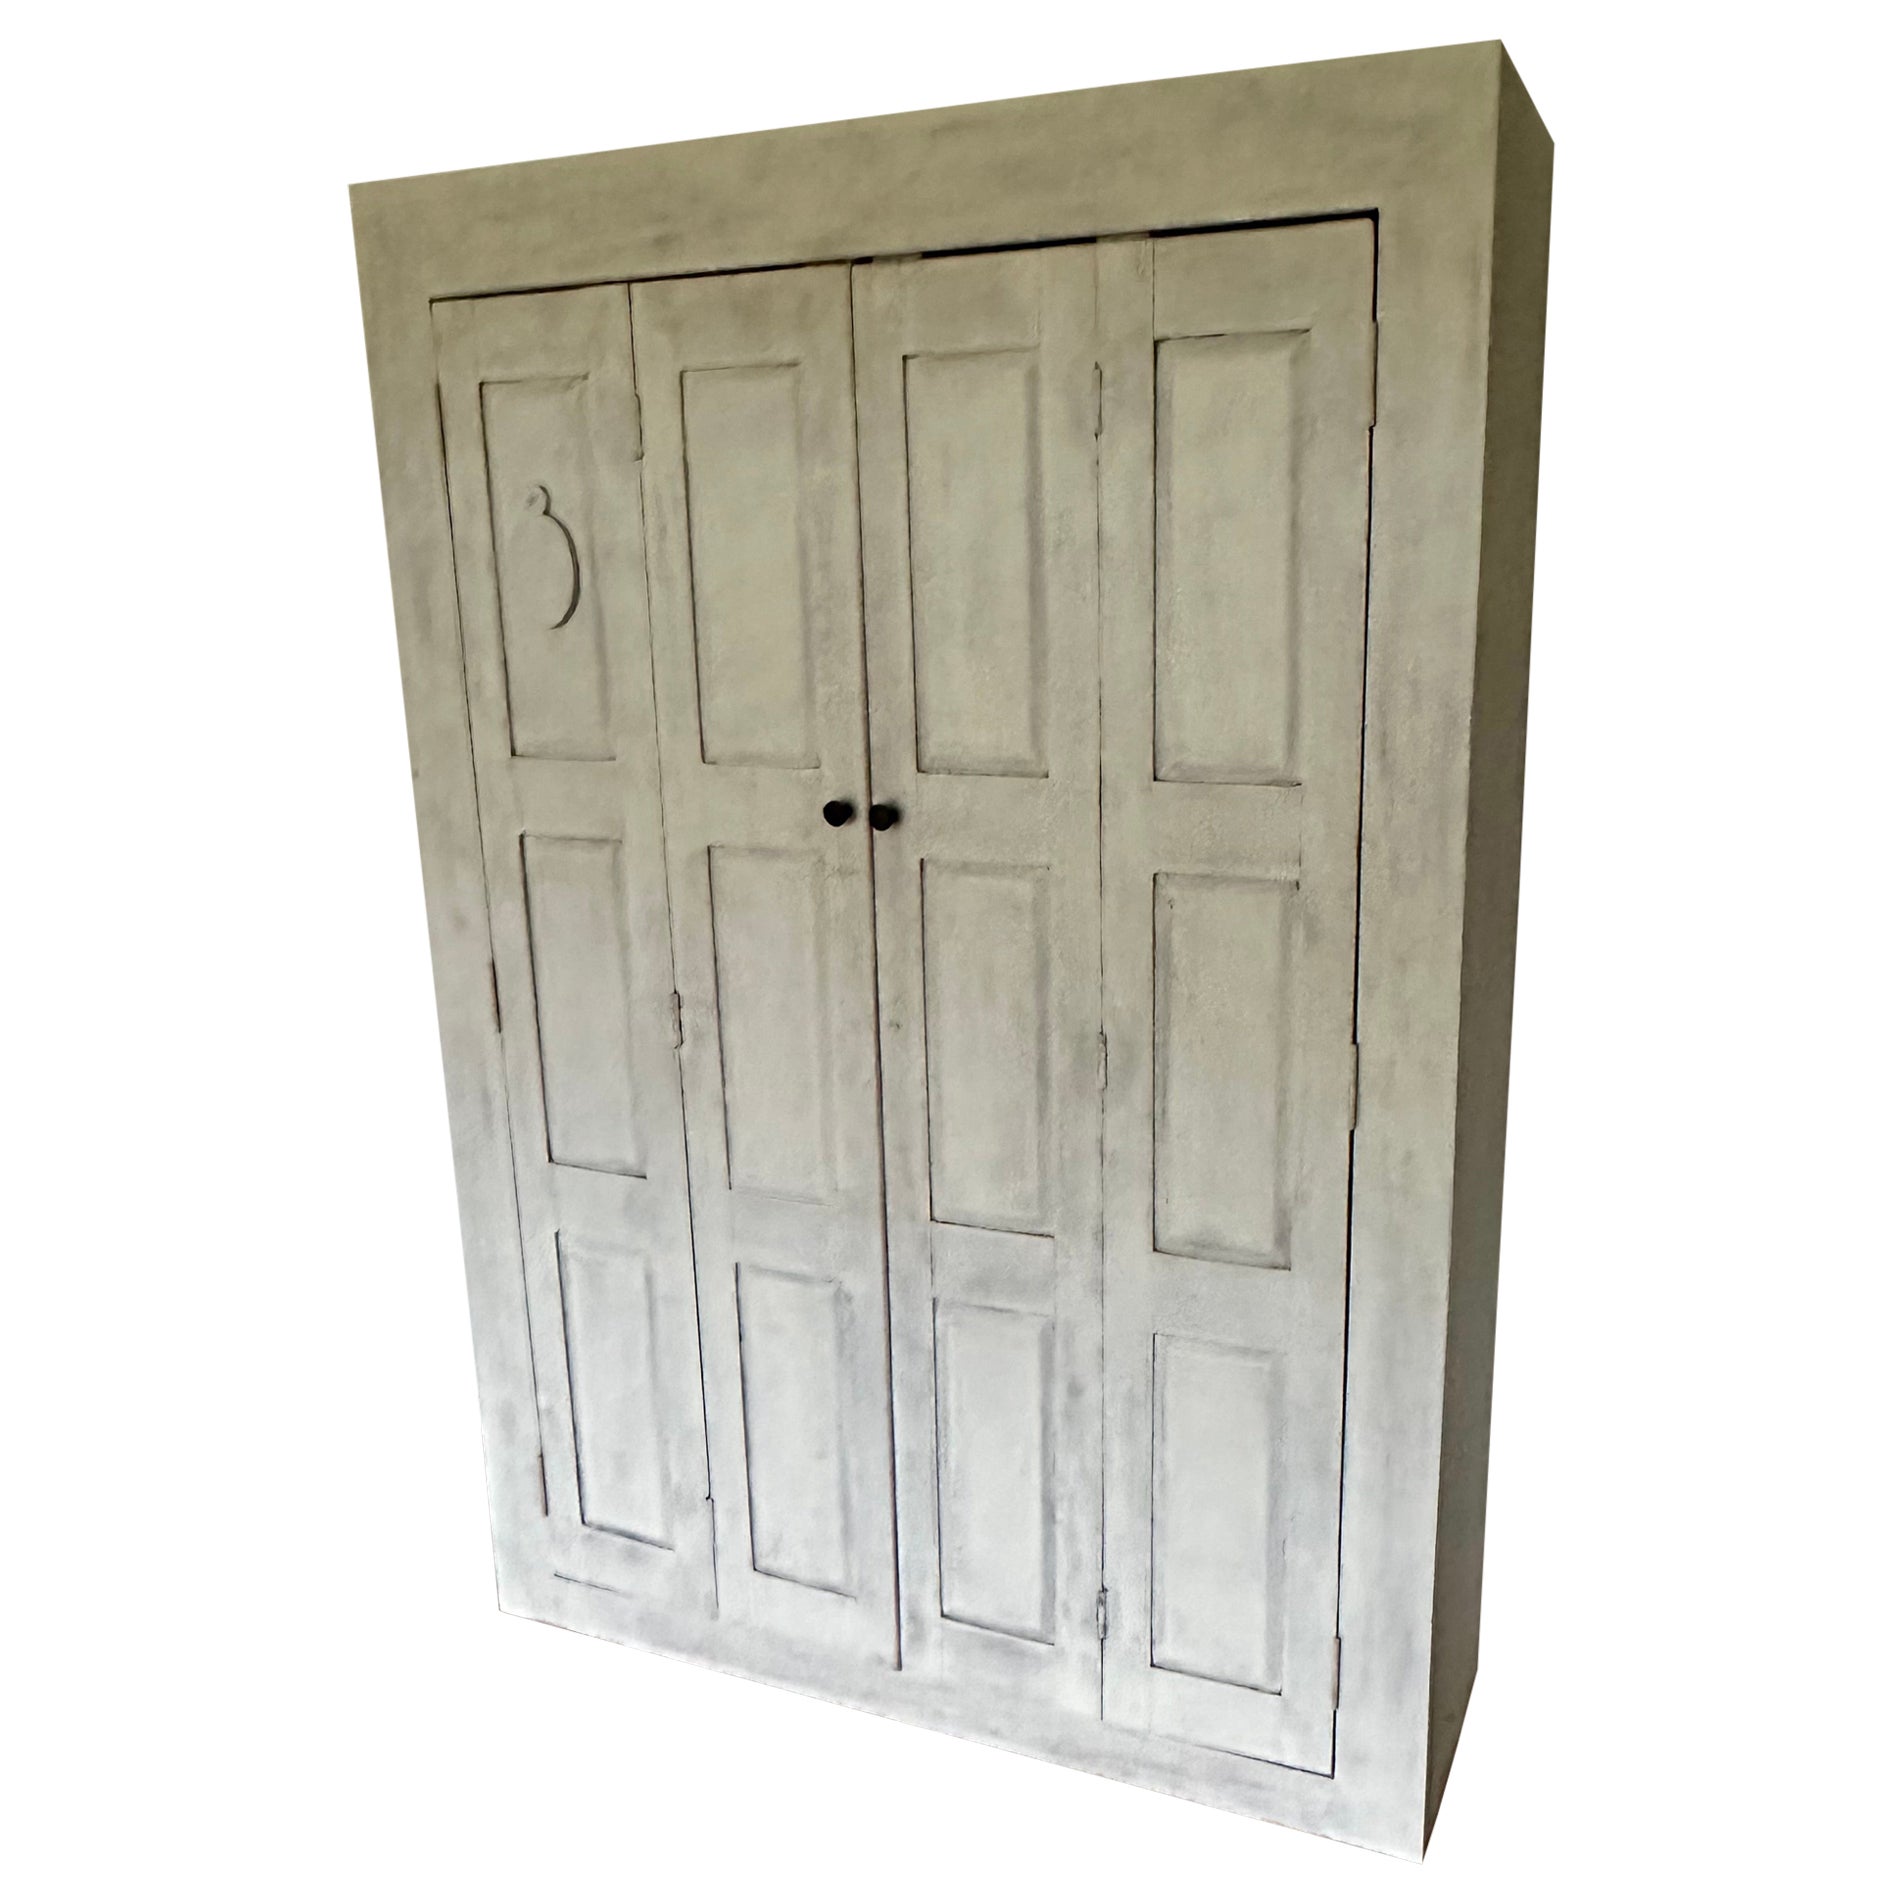 Narrow 14" Depth Cupboard Made With Antique French Doors For Sale